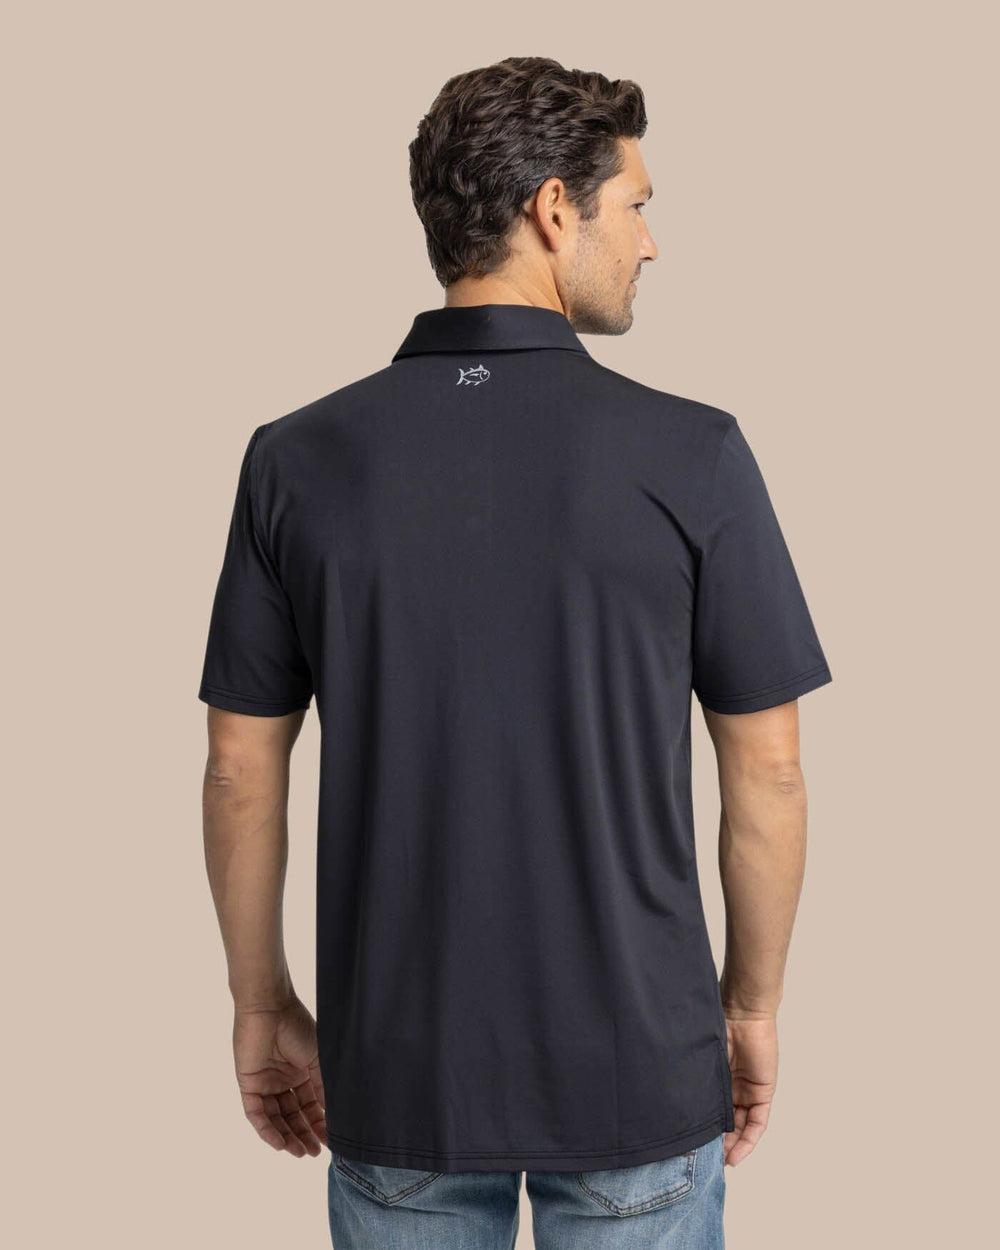 The back view of the Southern Tide Brenton Chest Stripe Performance Polo by Southern Tide - Black